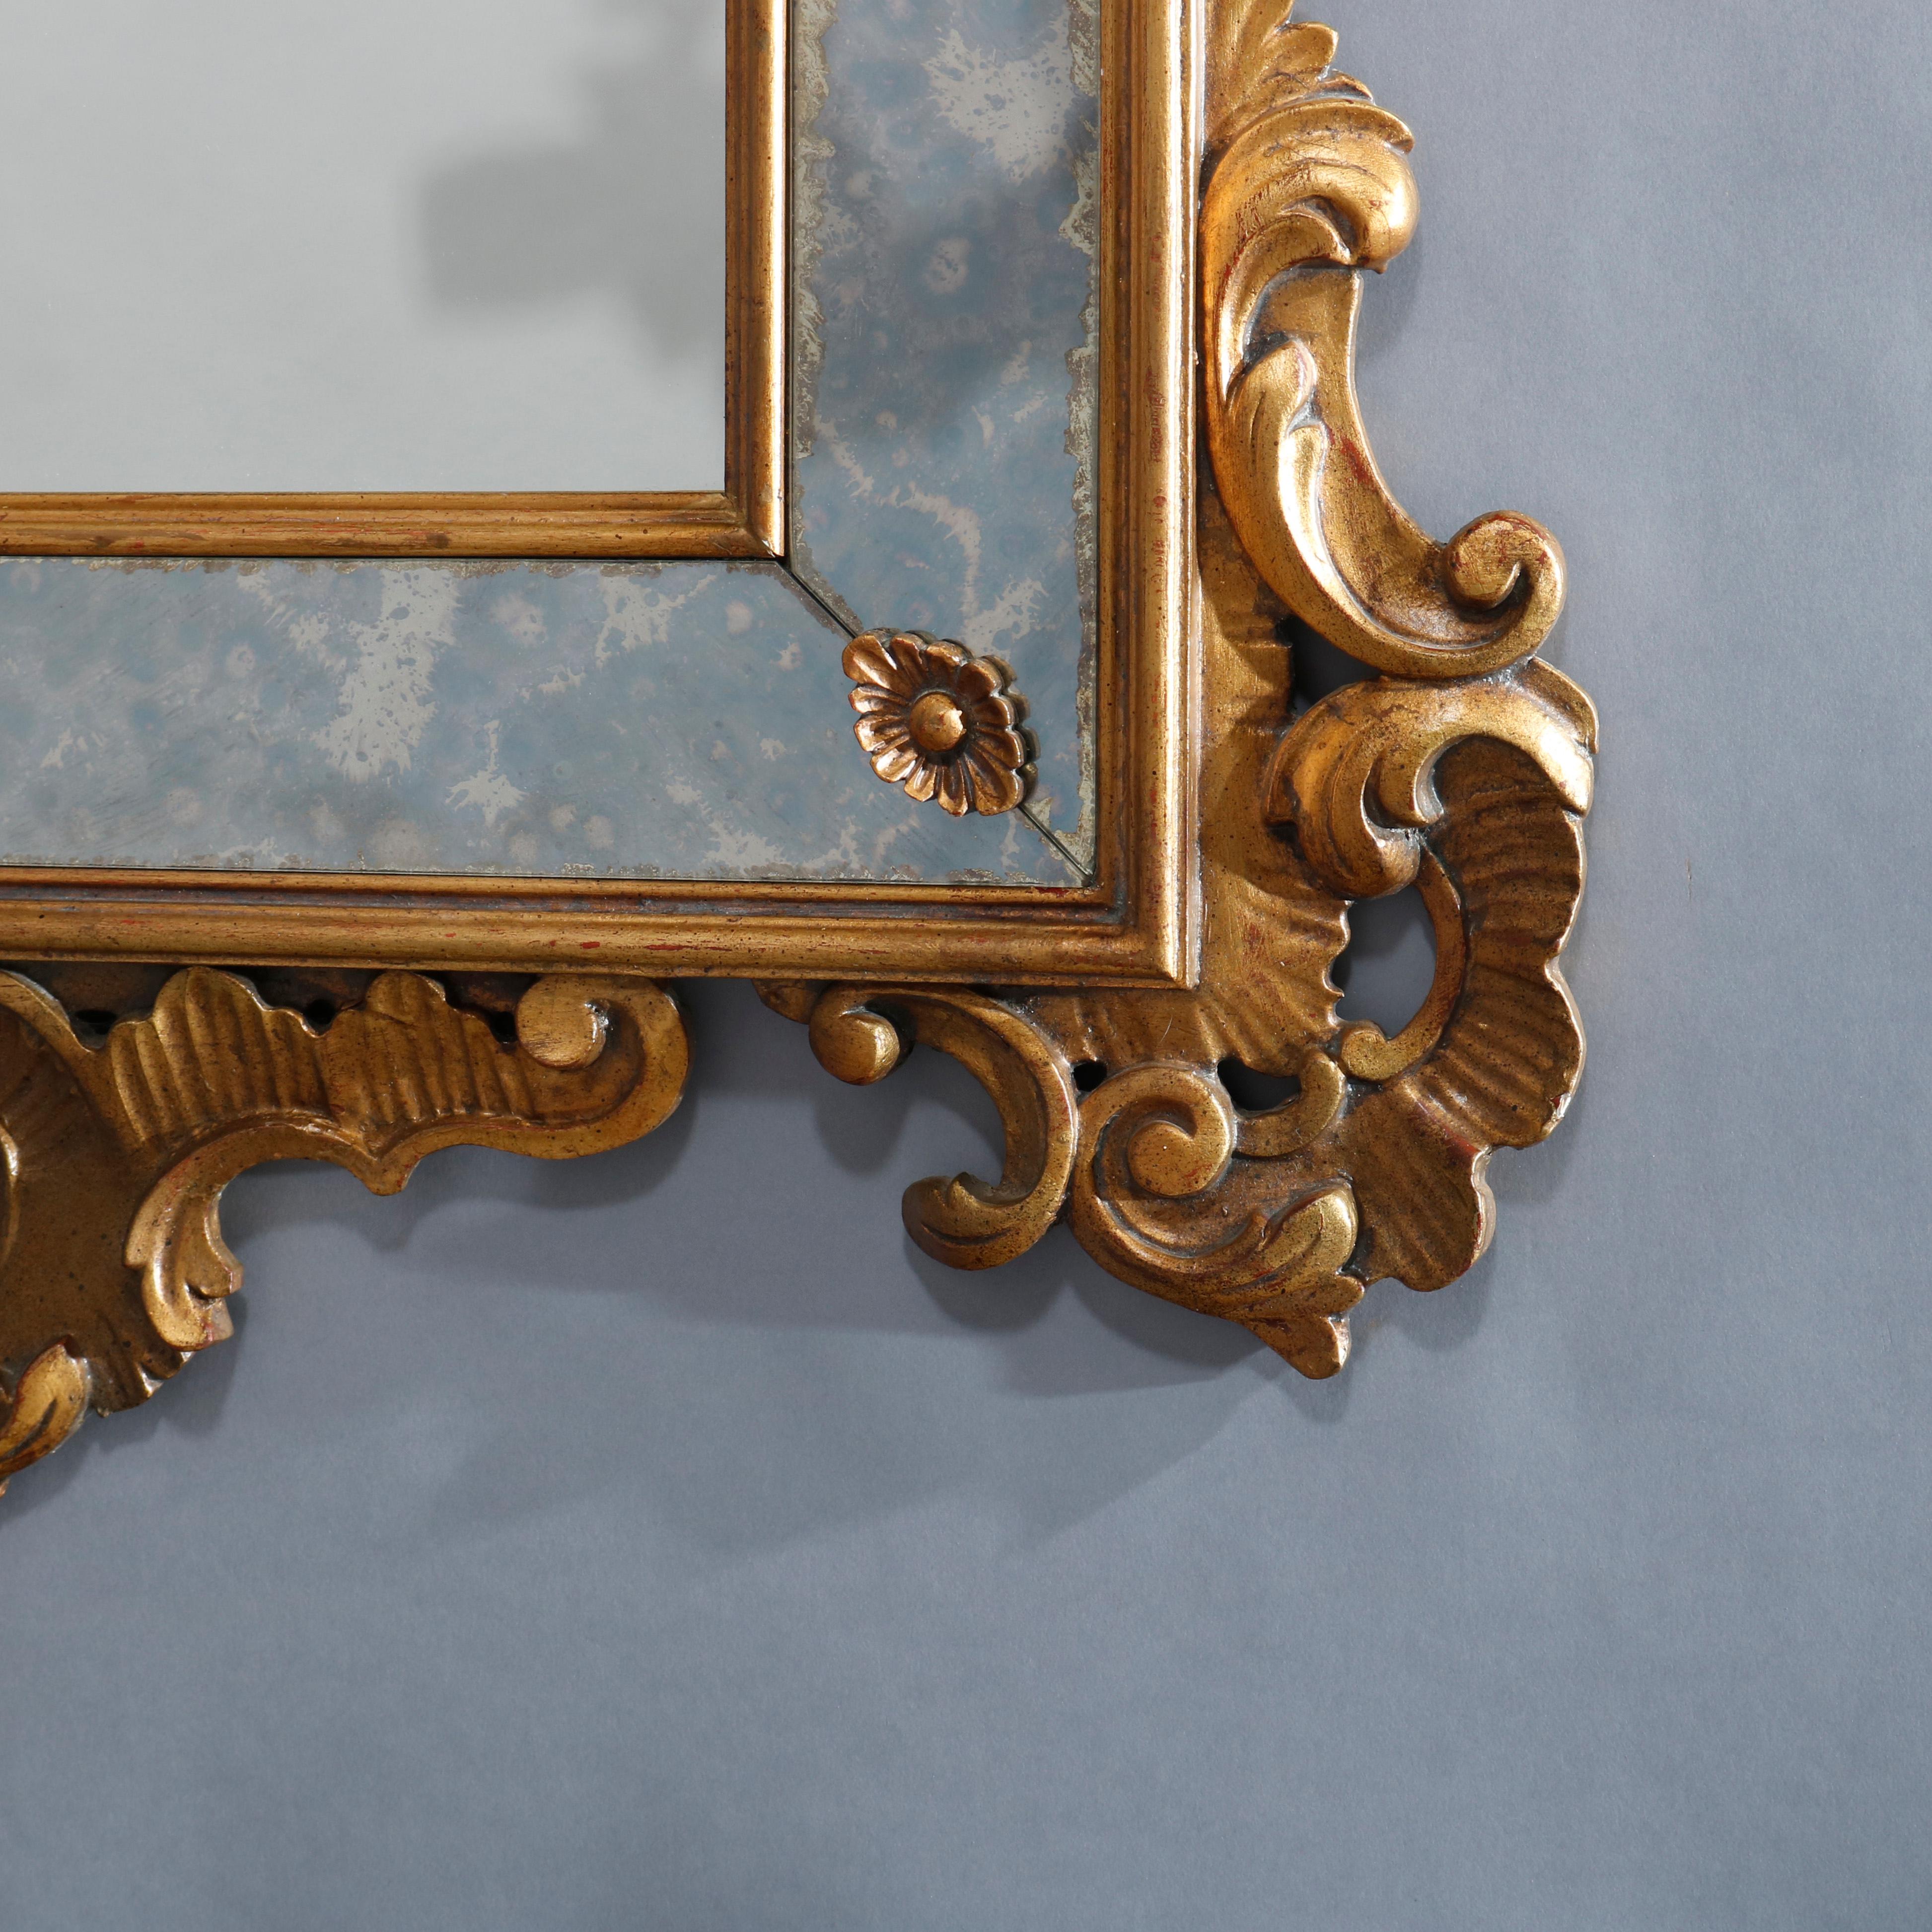 Vintage Italian Rococo Style Giltwood Parclose Over Mantel Mirror by Karges 10